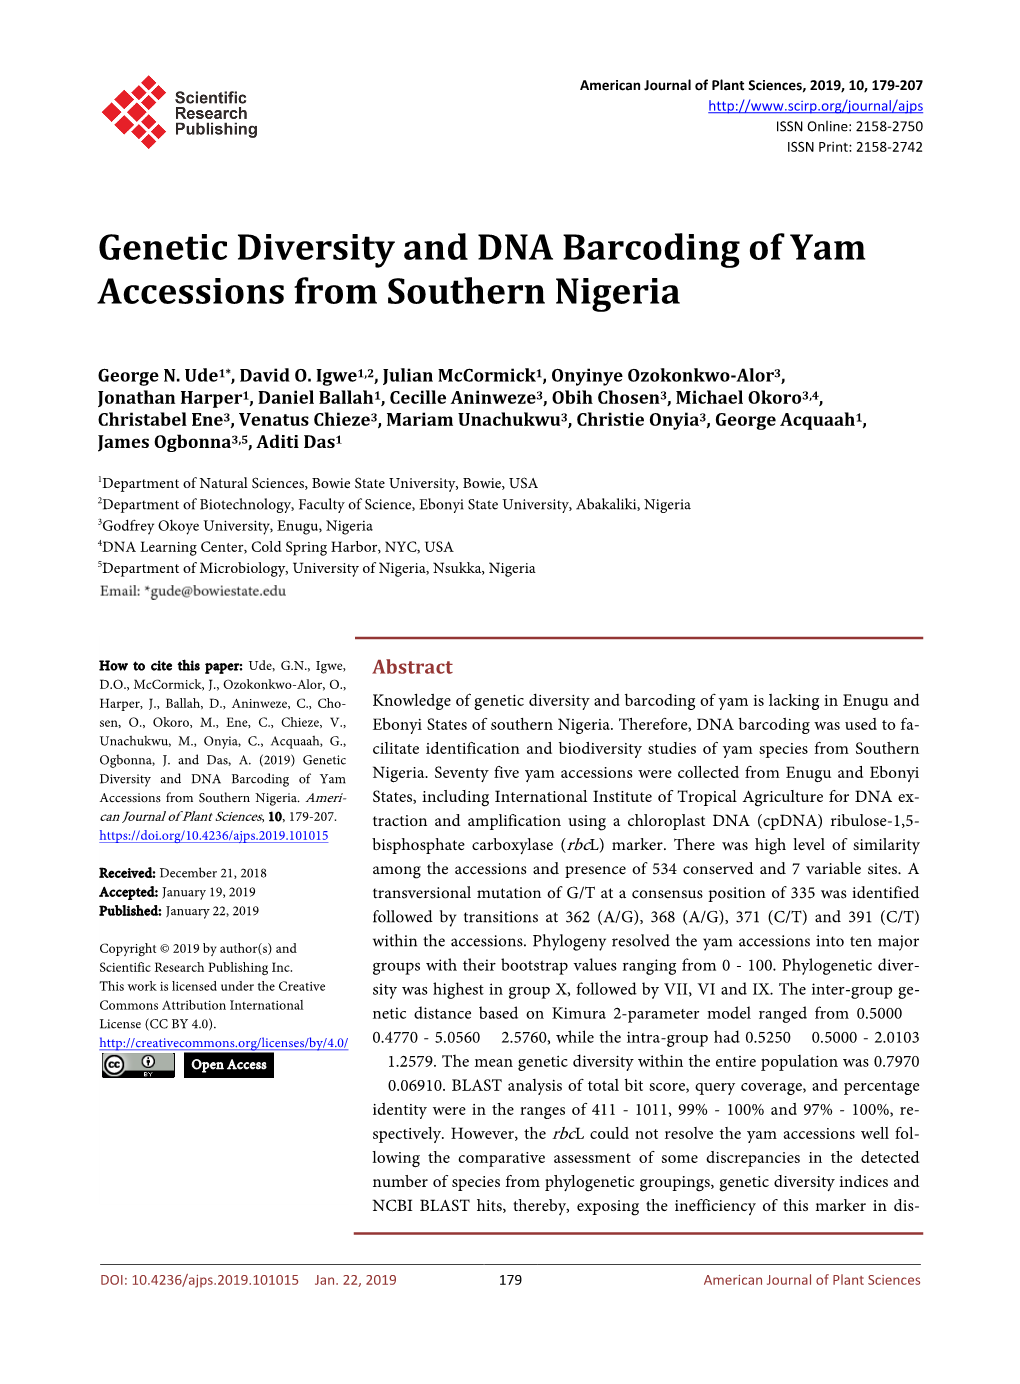 Genetic Diversity and DNA Barcoding of Yam Accessions from Southern Nigeria